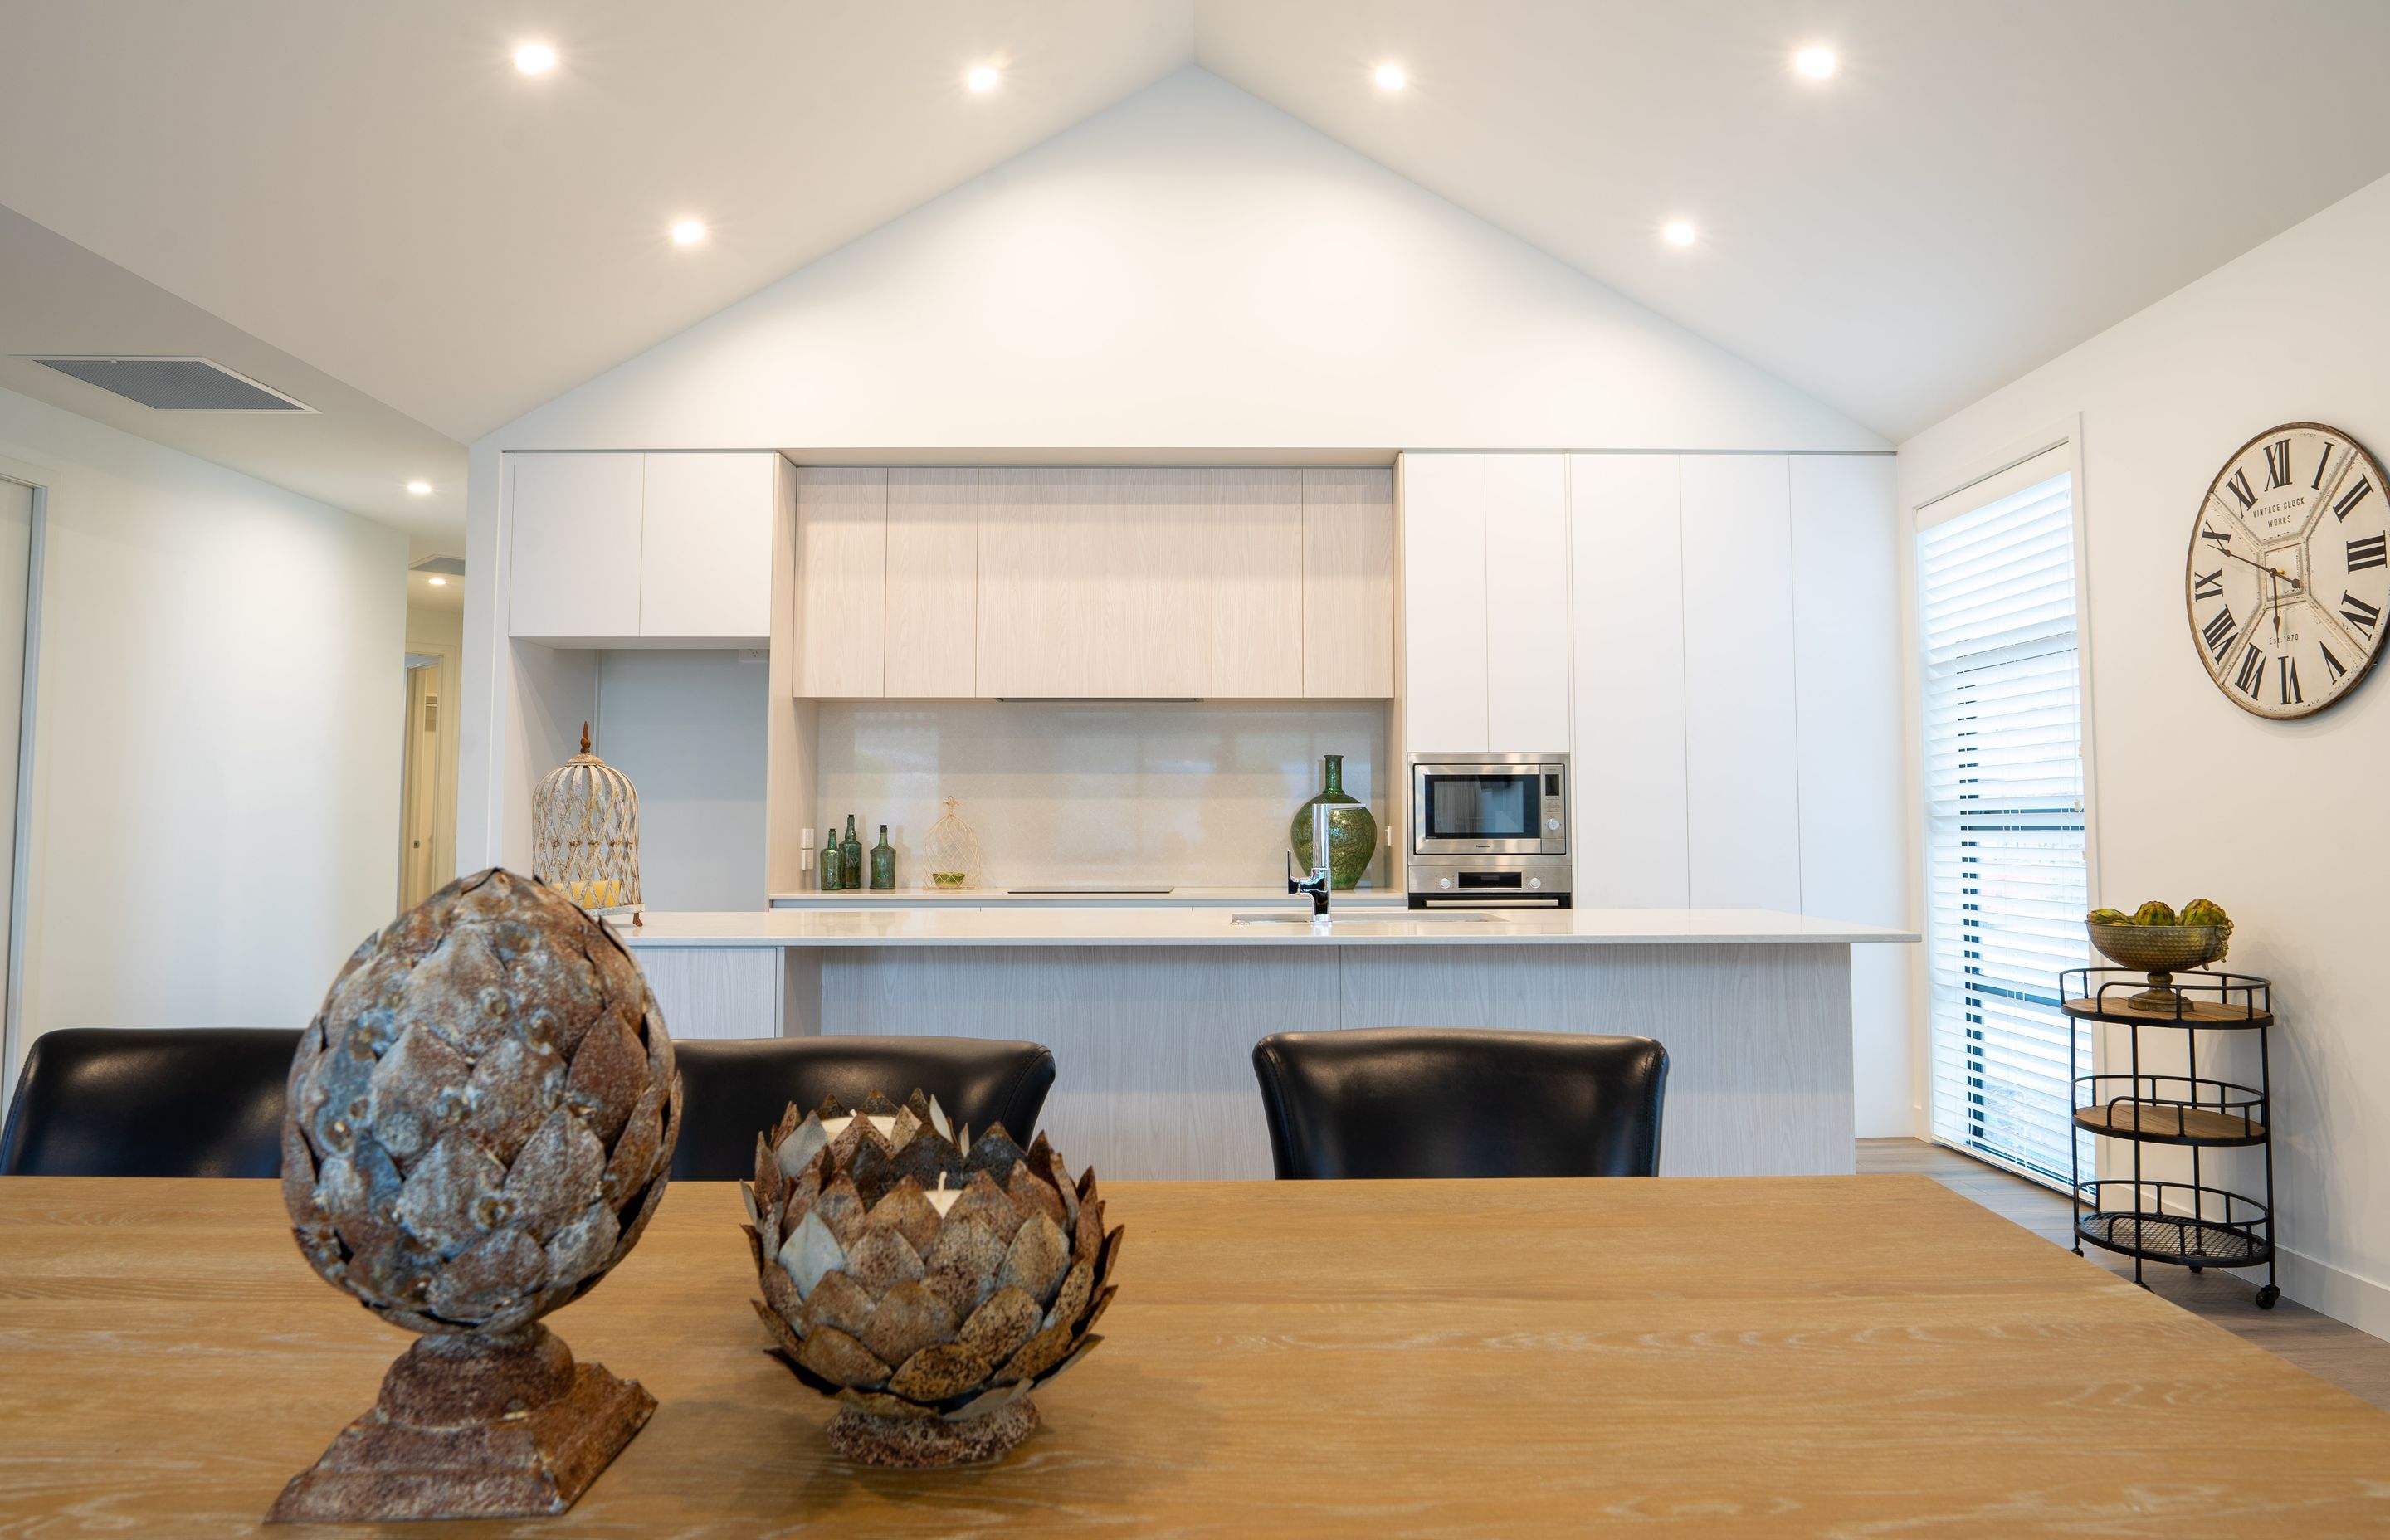 A gabled ceiling makes the open-plan kitchen and living feel spacious.